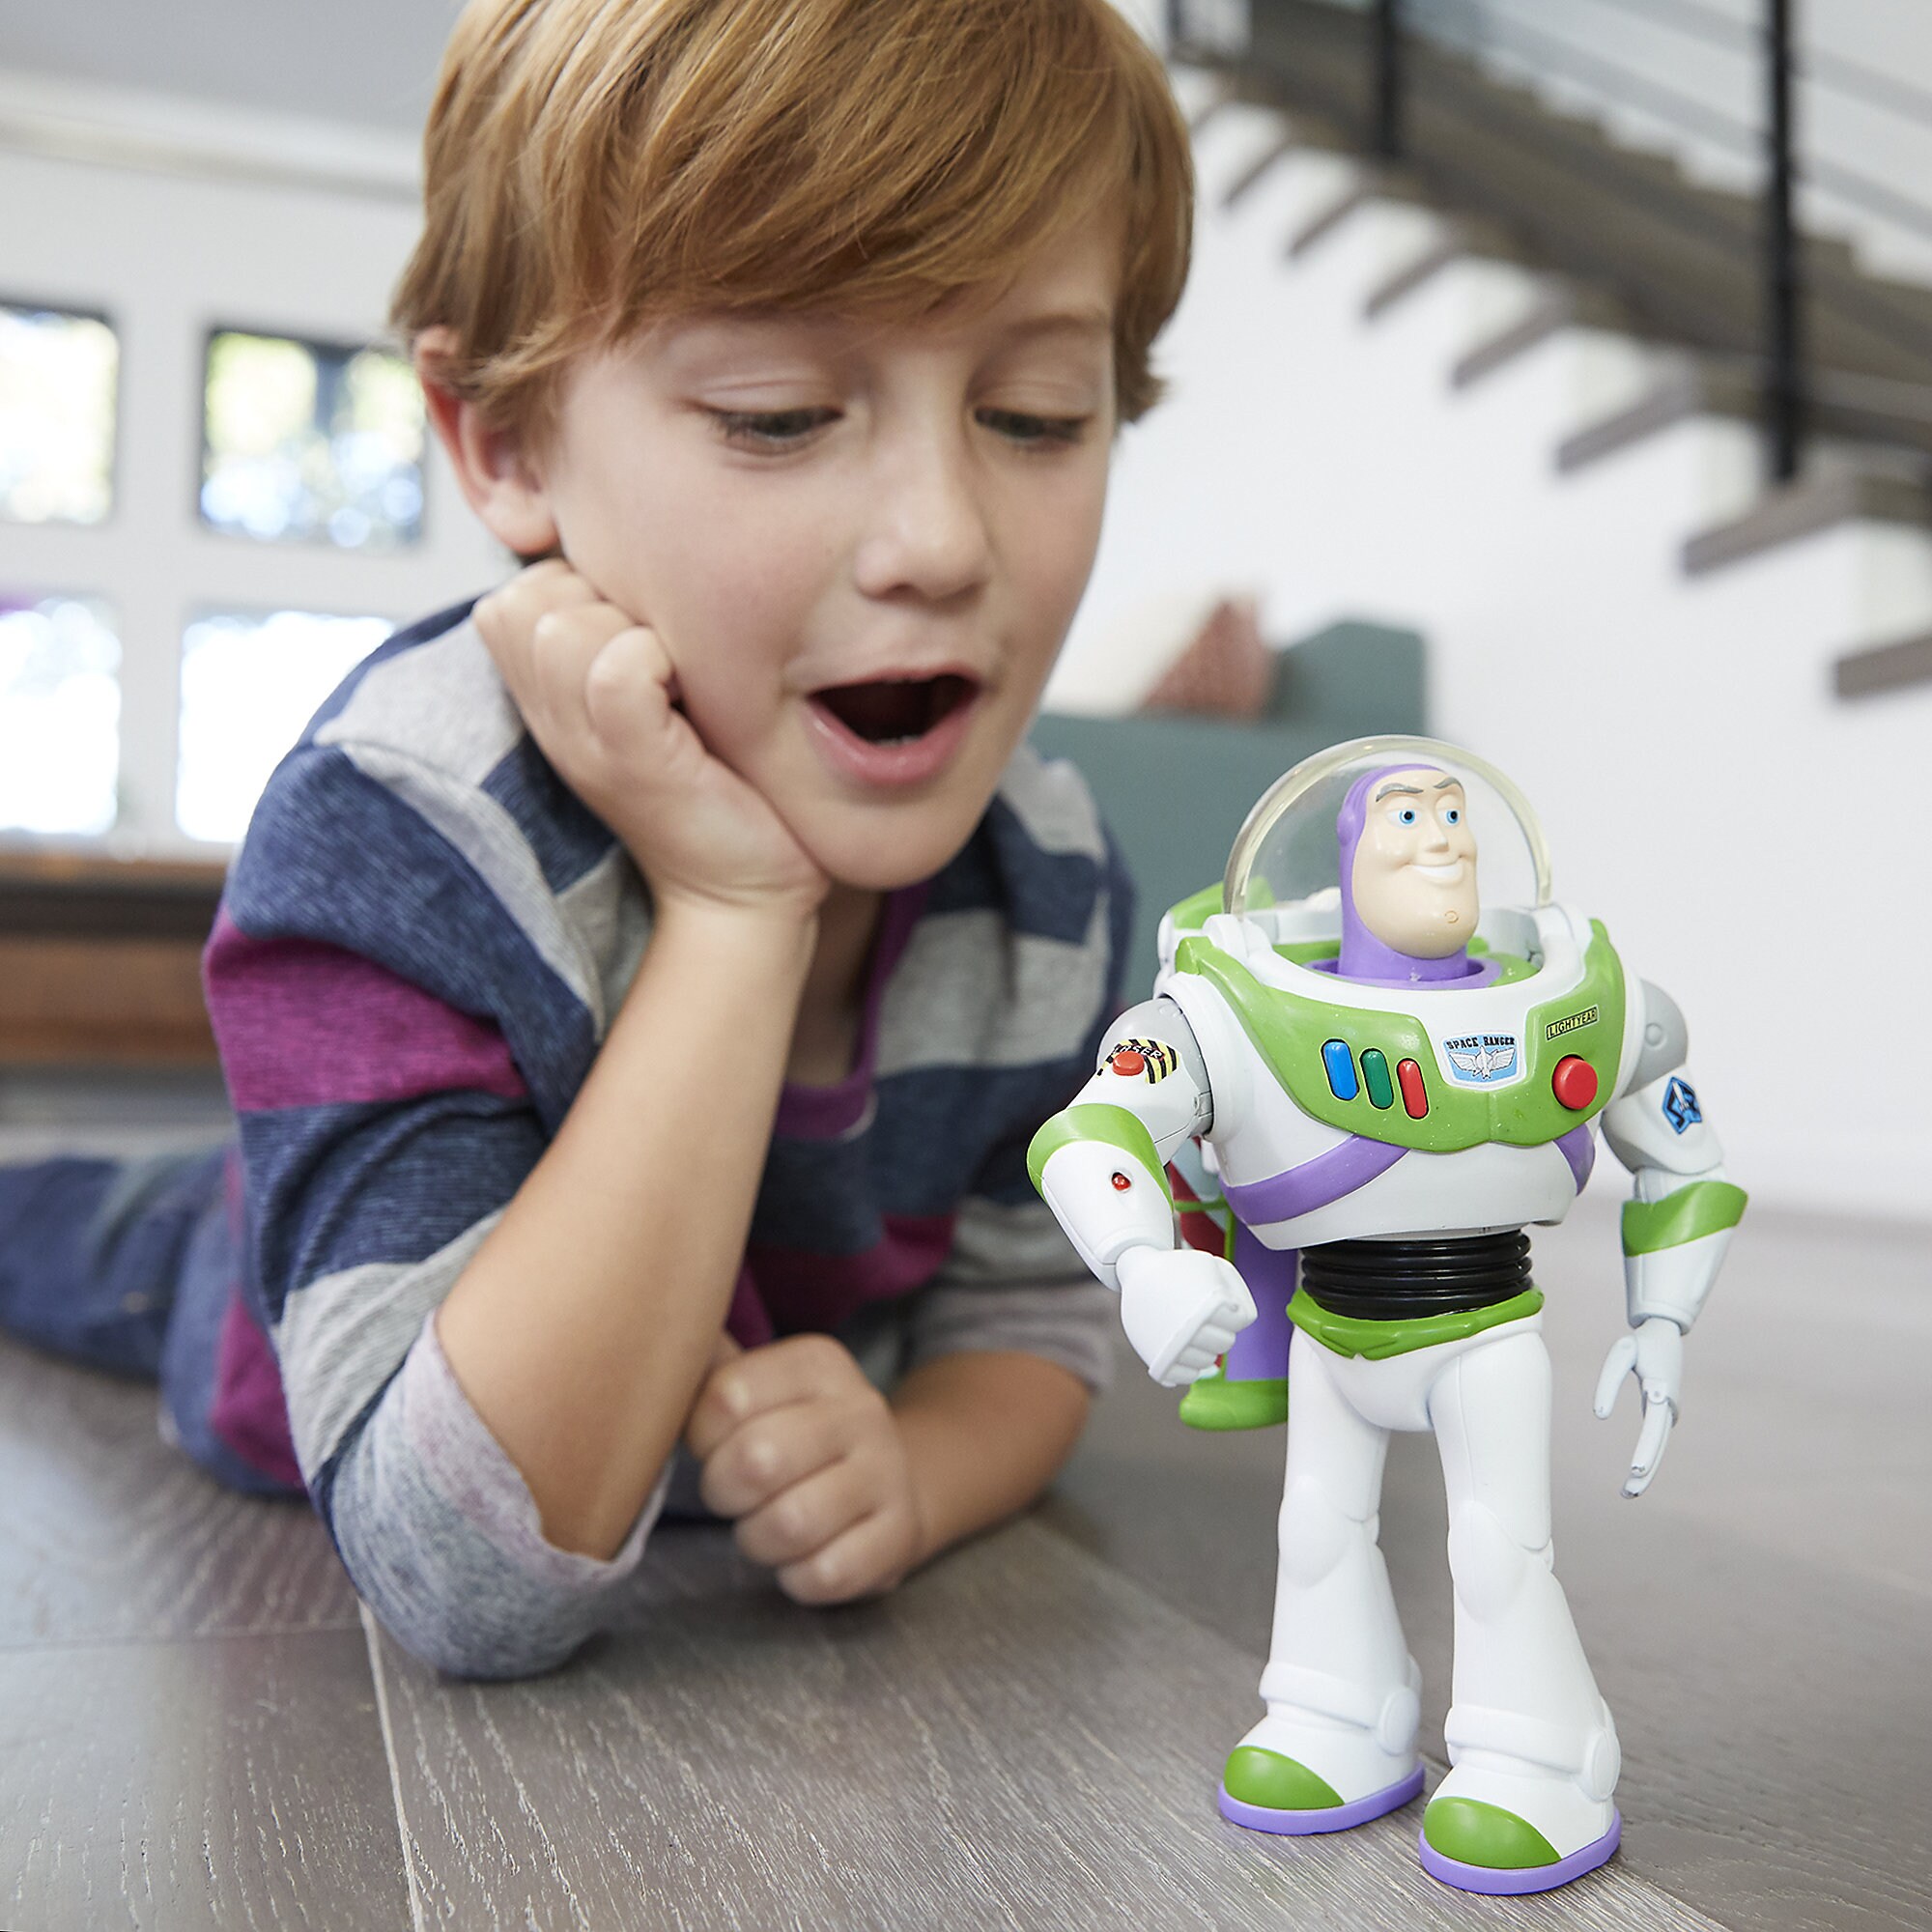 Buzz Lightyear Ultimate Action Figure - 7'' - Toy Story 4